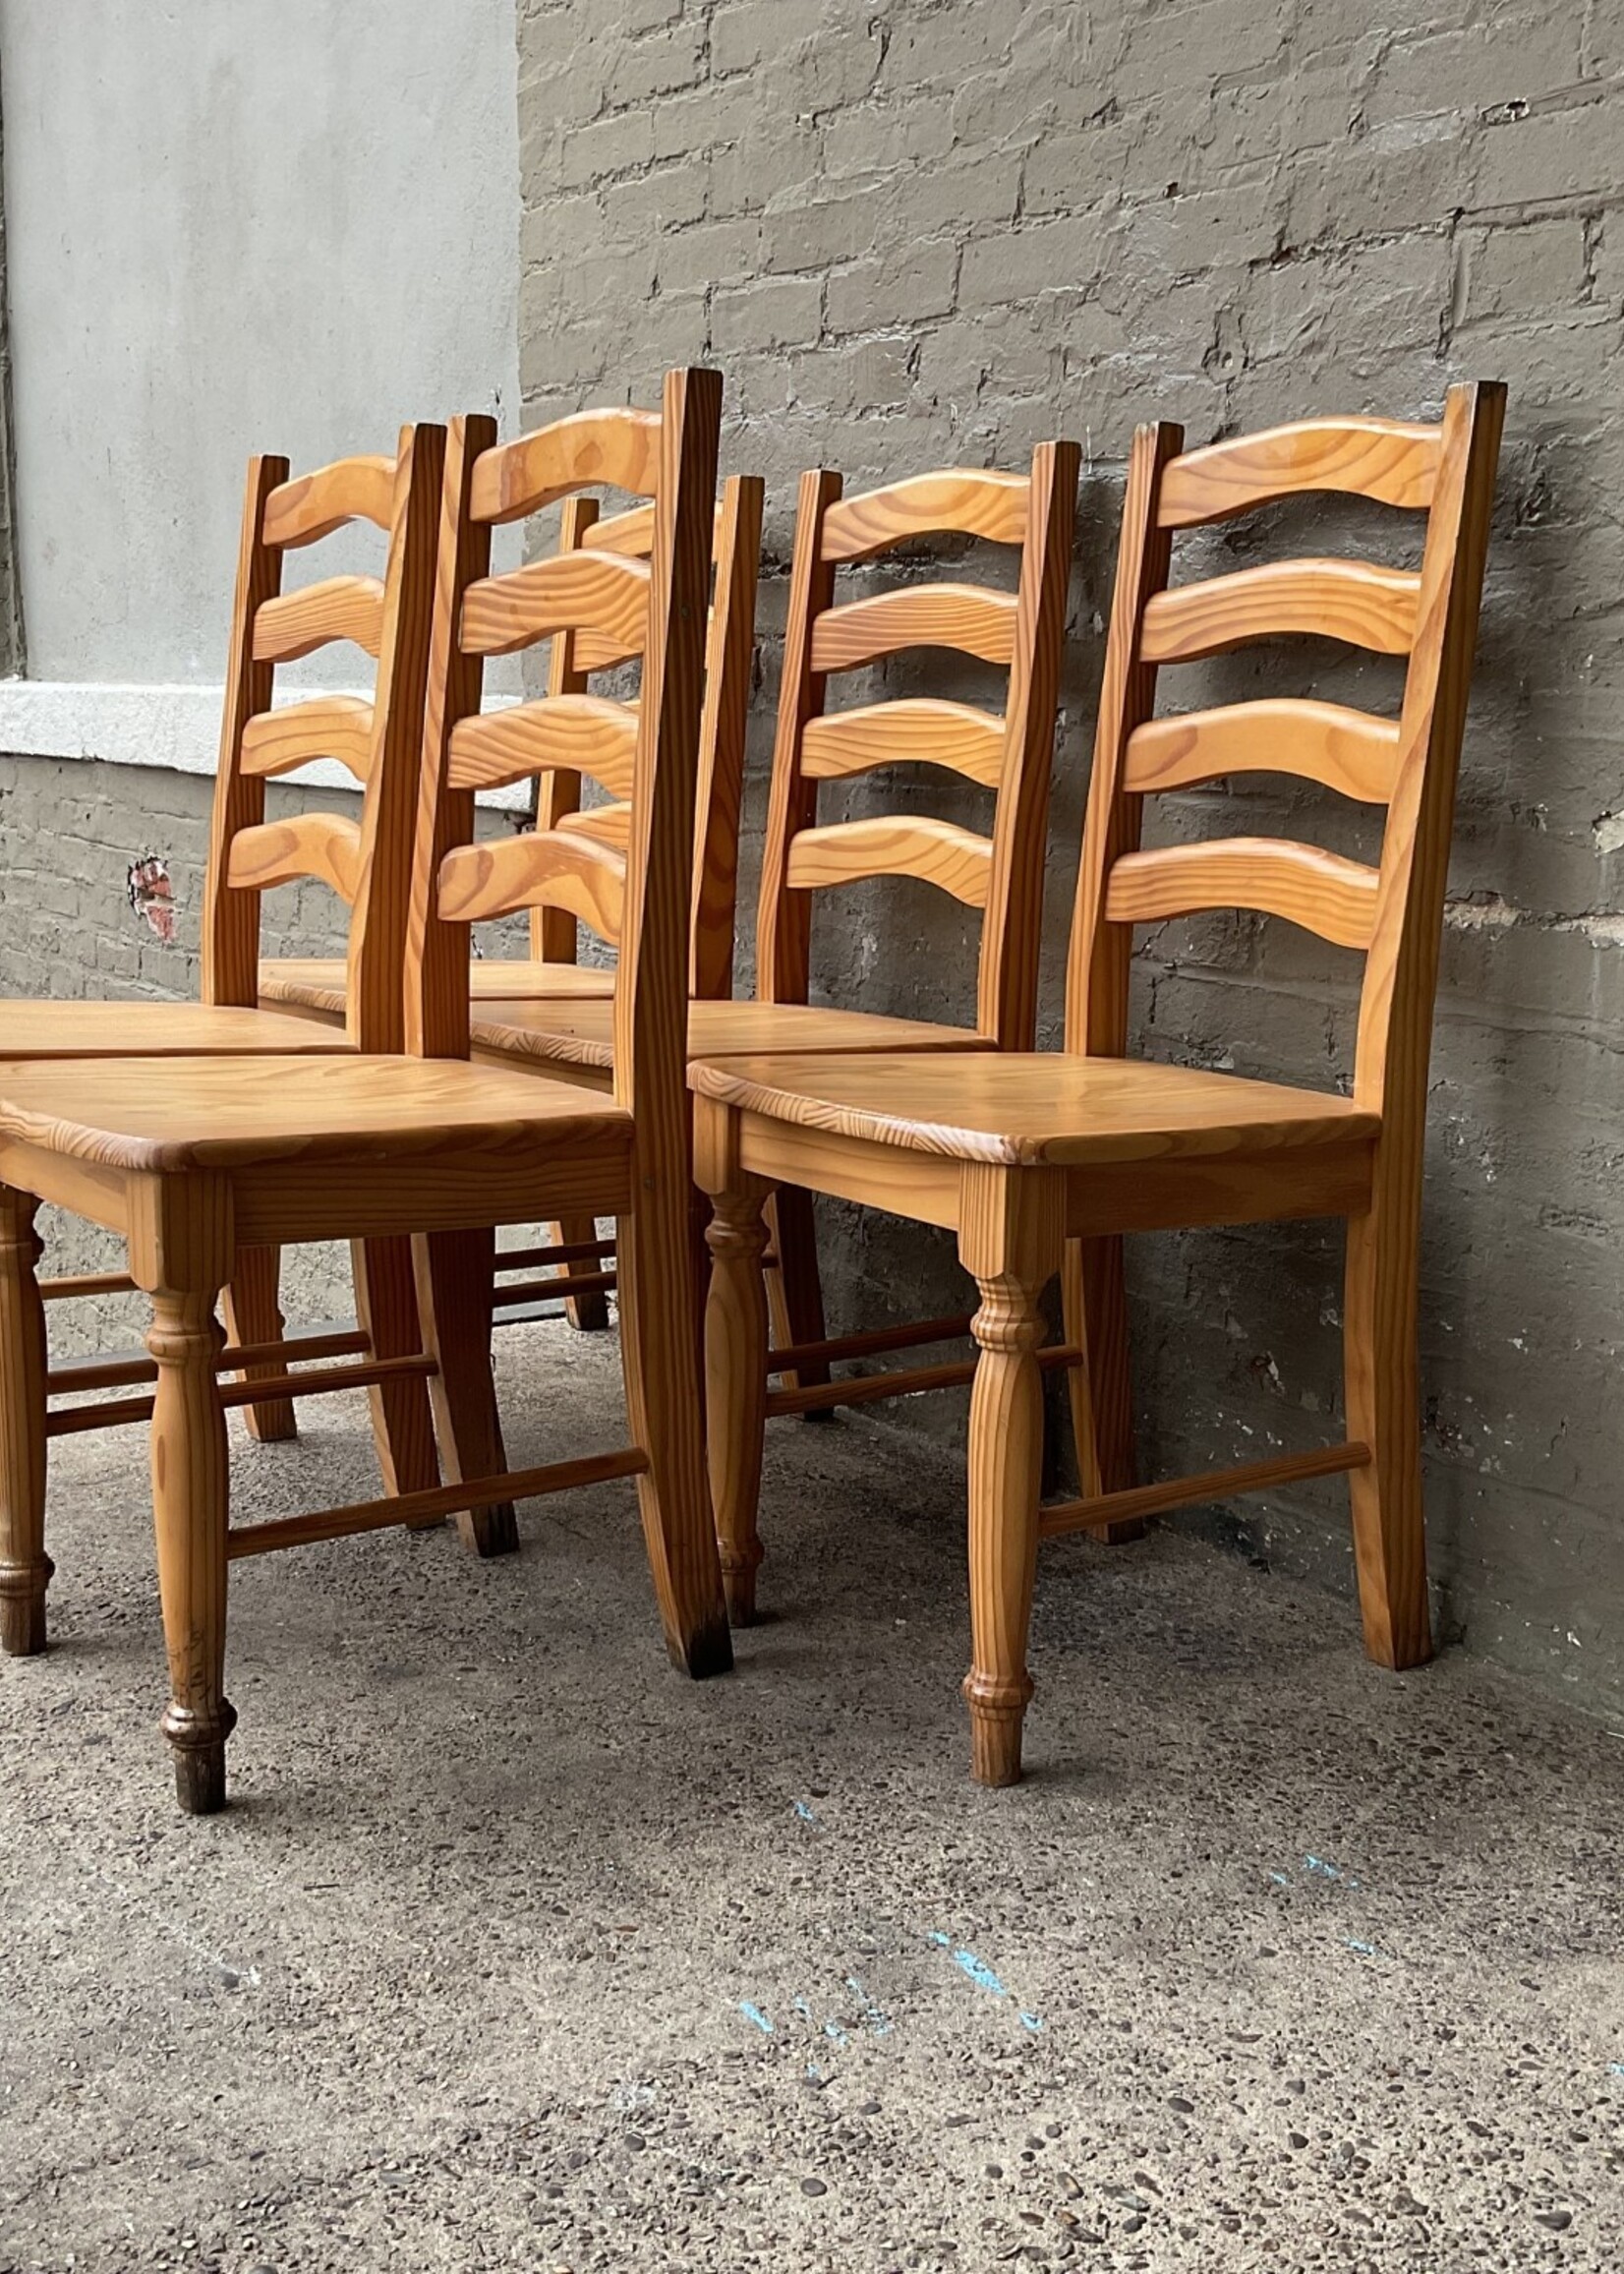 GOODWOOD Set of 5 Ladderback Pine Chairs